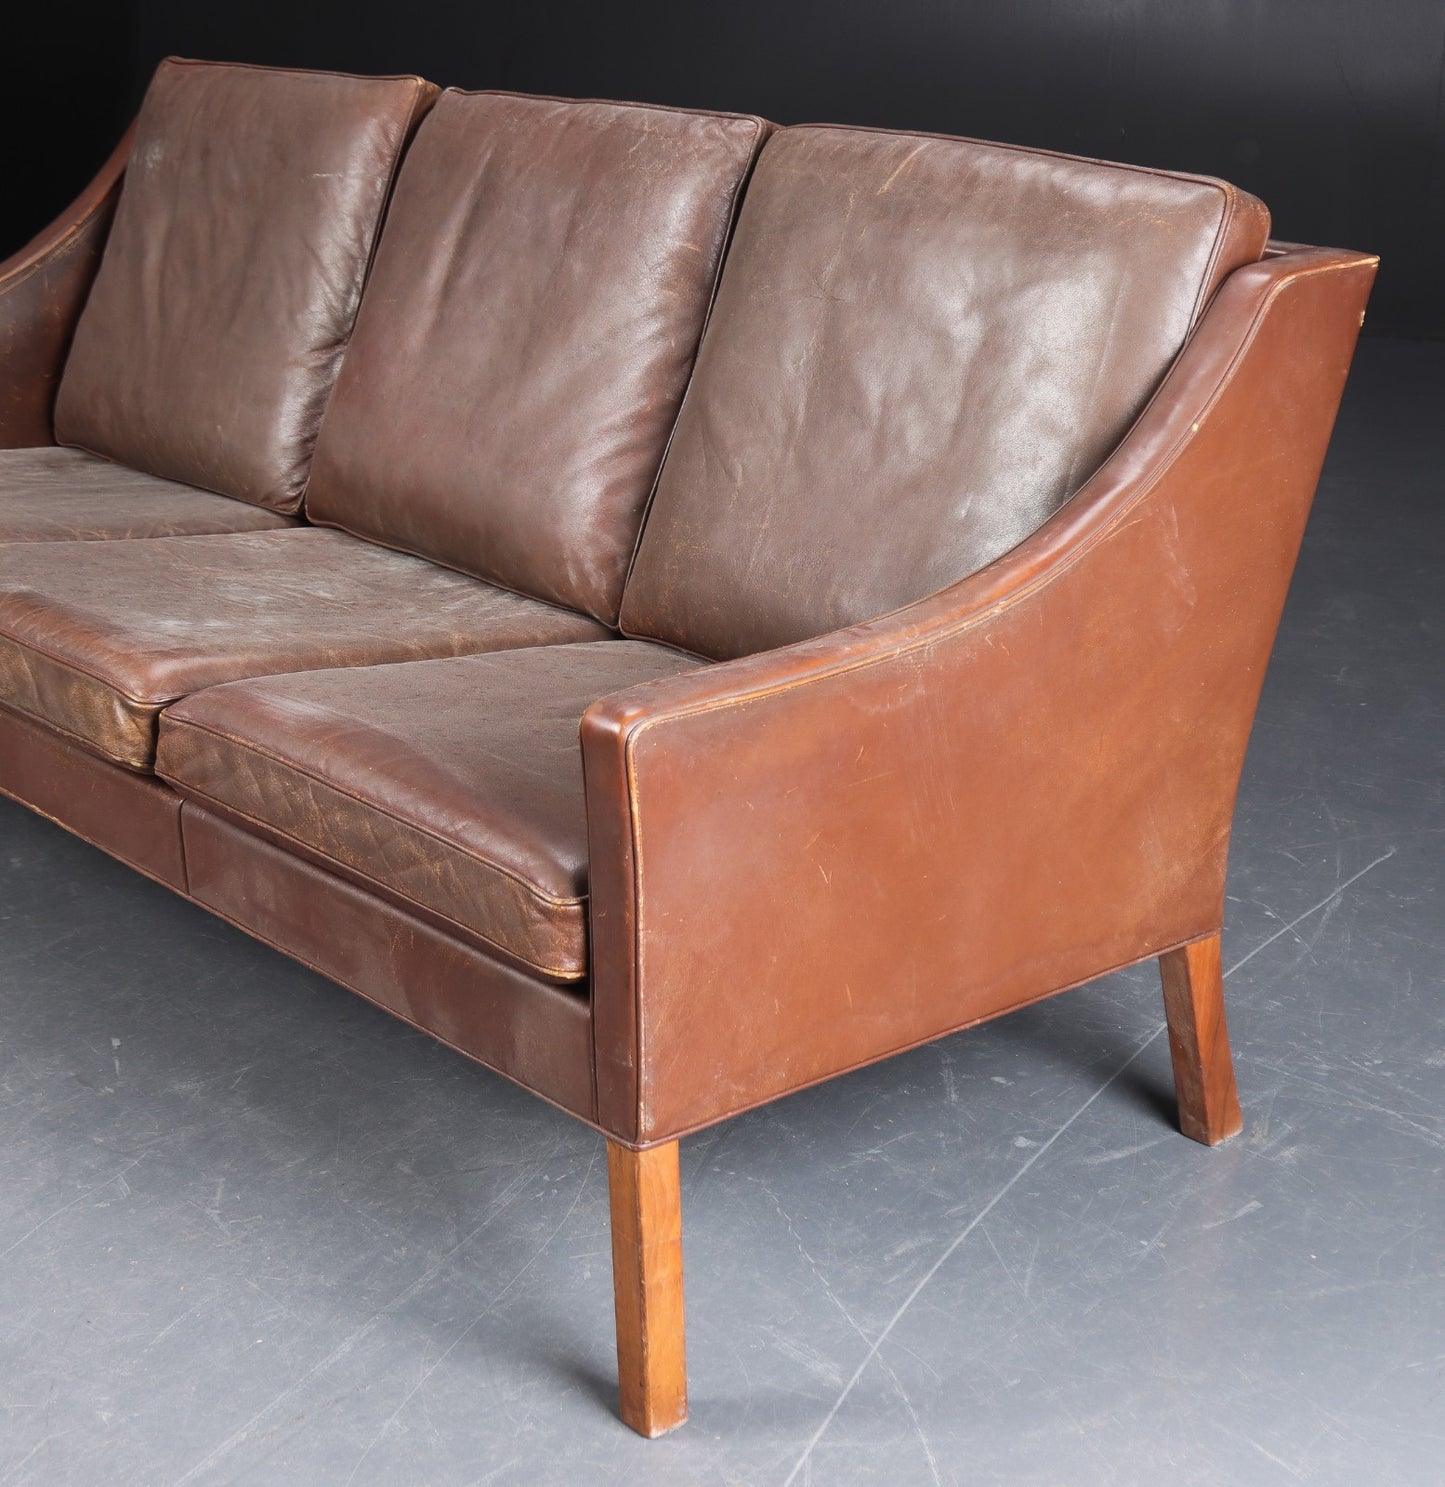 Børge Mogensen. Three-person sofa model 2209 in teak and leather. To be restored.